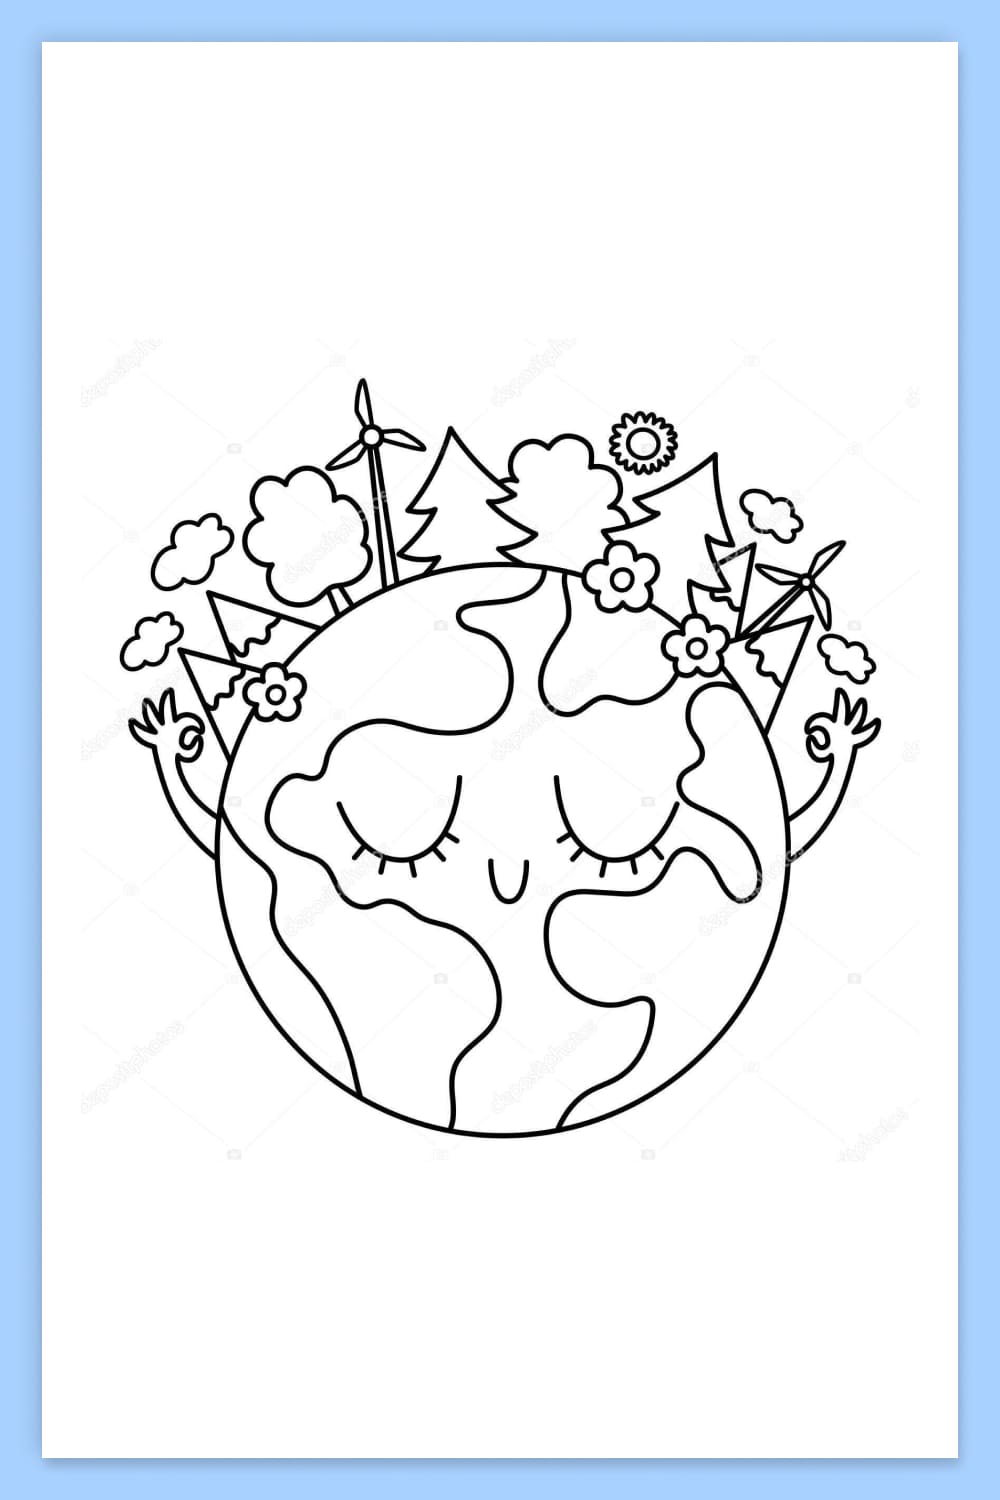 Schematic representation of the planet Earth with hands, forest and mountains on it.